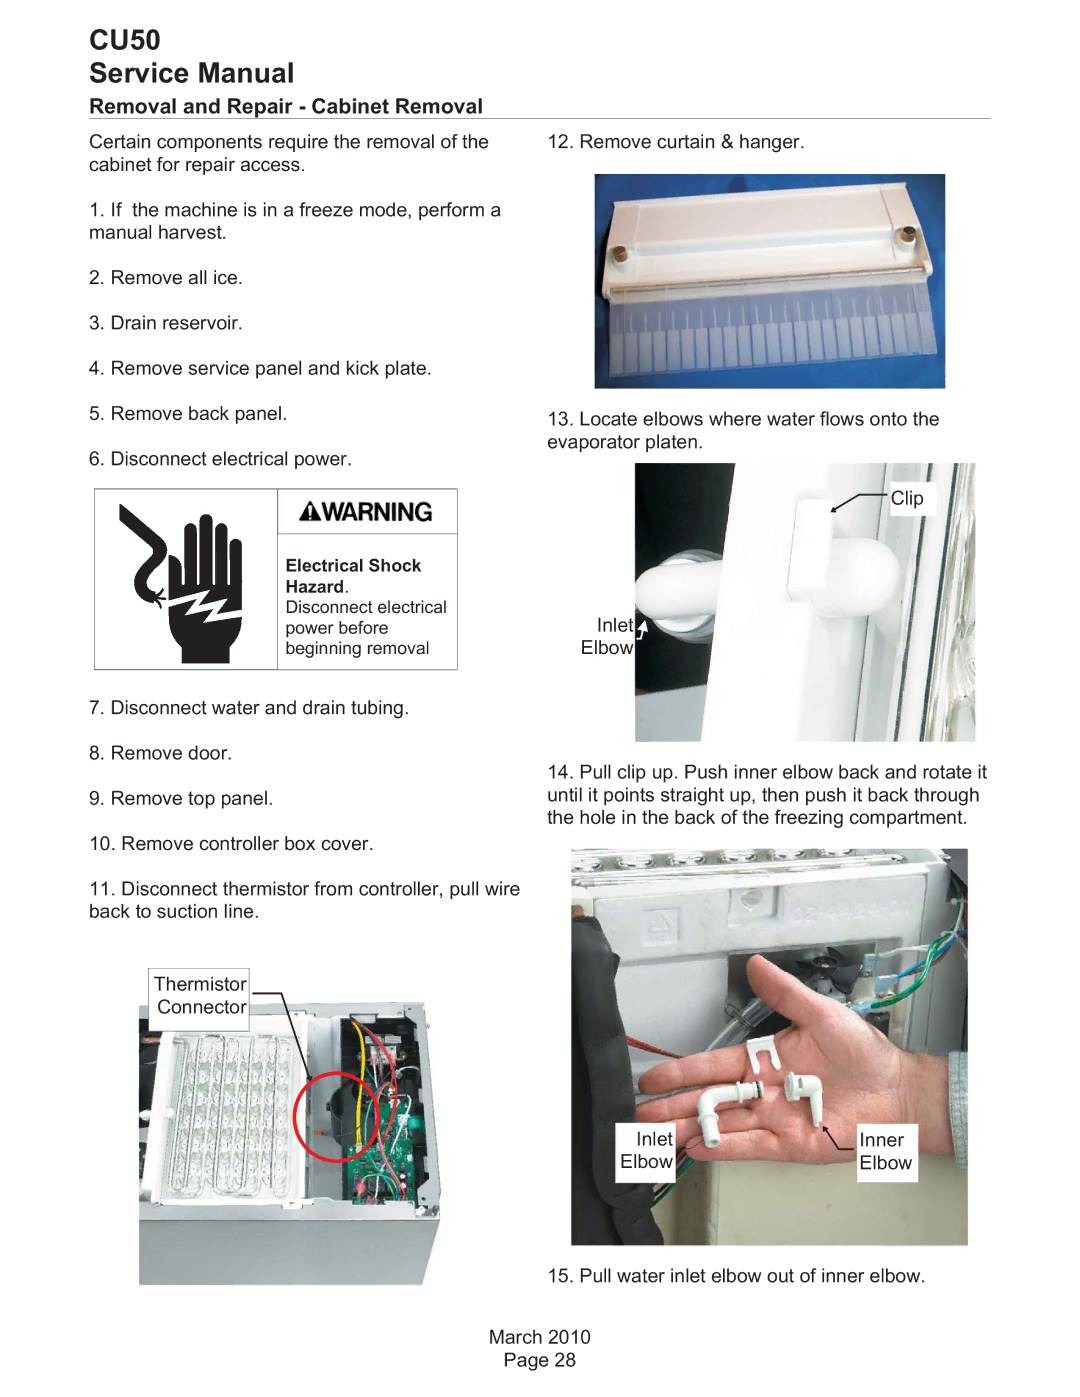 Scotsman Ice CU50 service manual Removal and Repair Cabinet Removal 